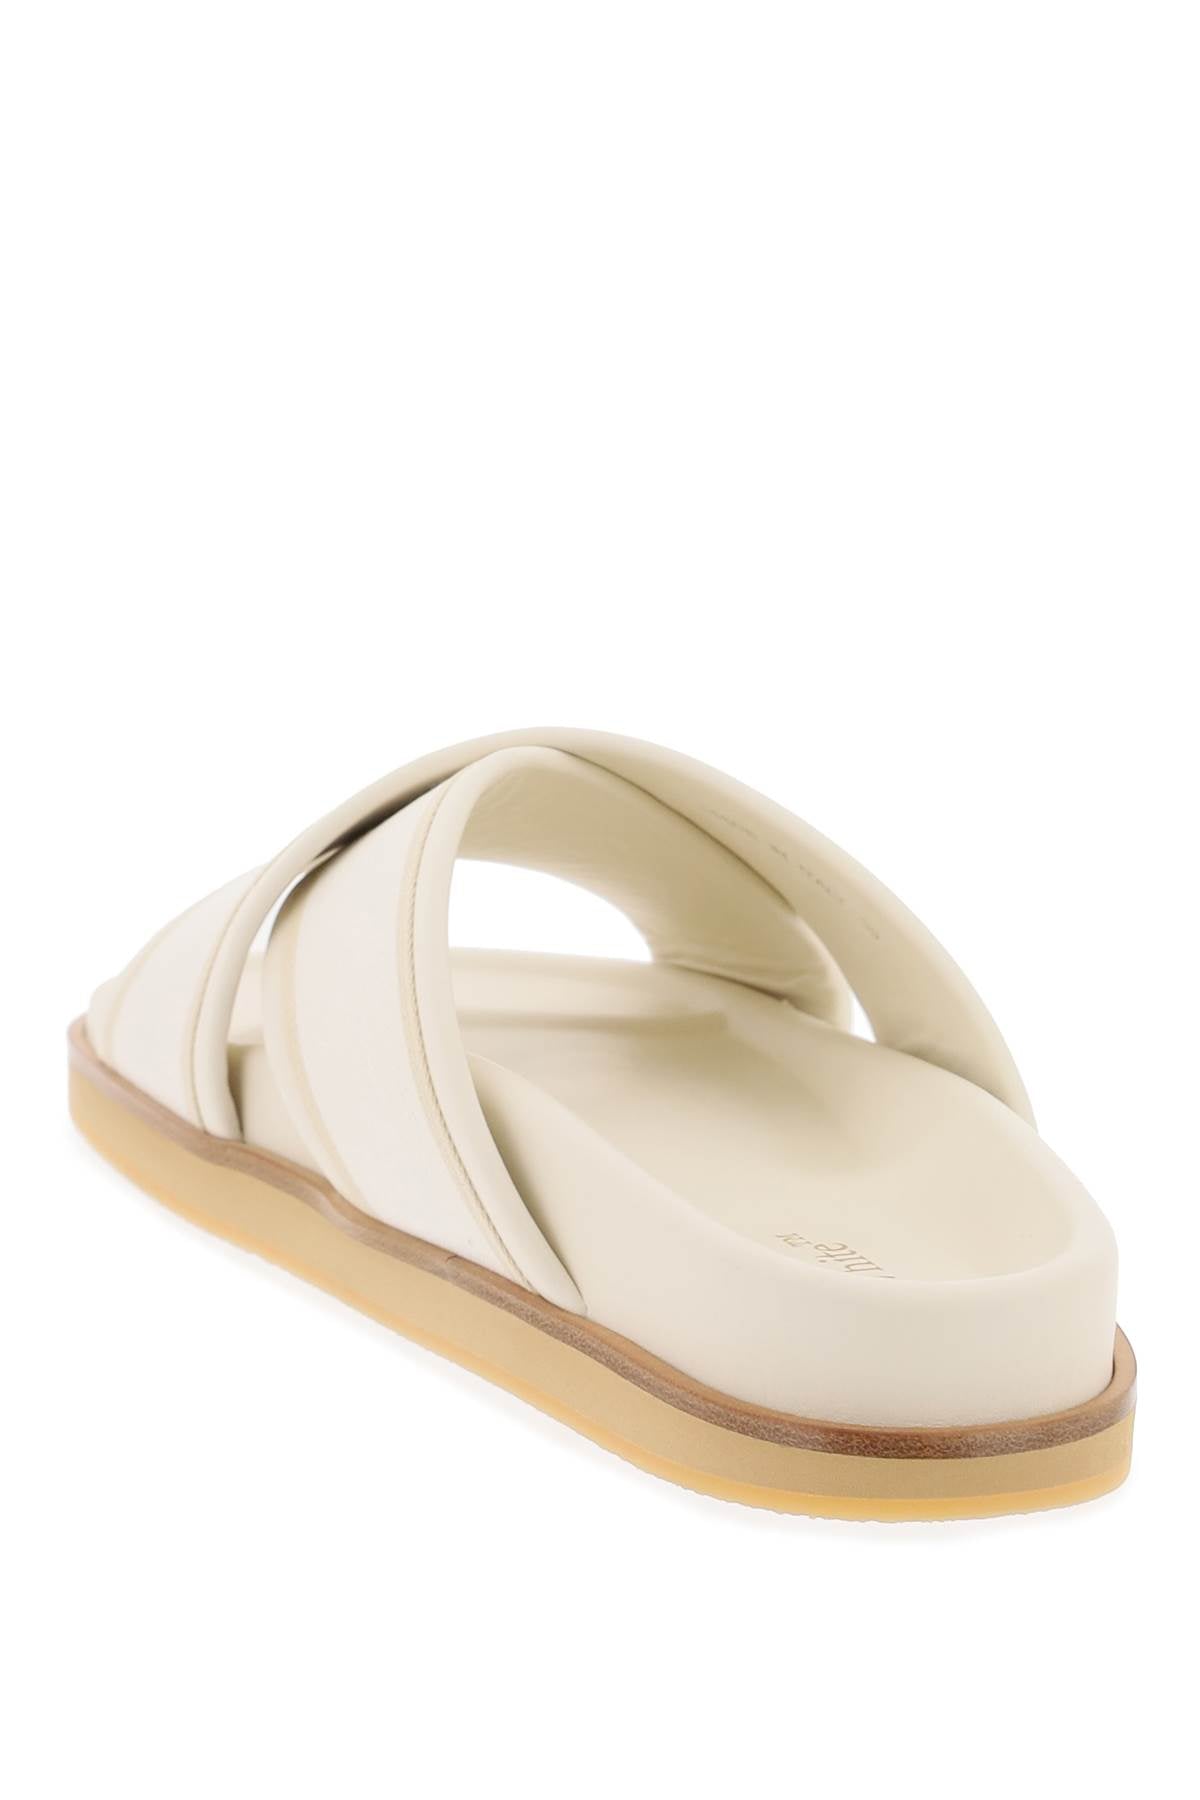 OFF-WHITE Grey Embroidered Leather Sandals for Women from SS24 Collection